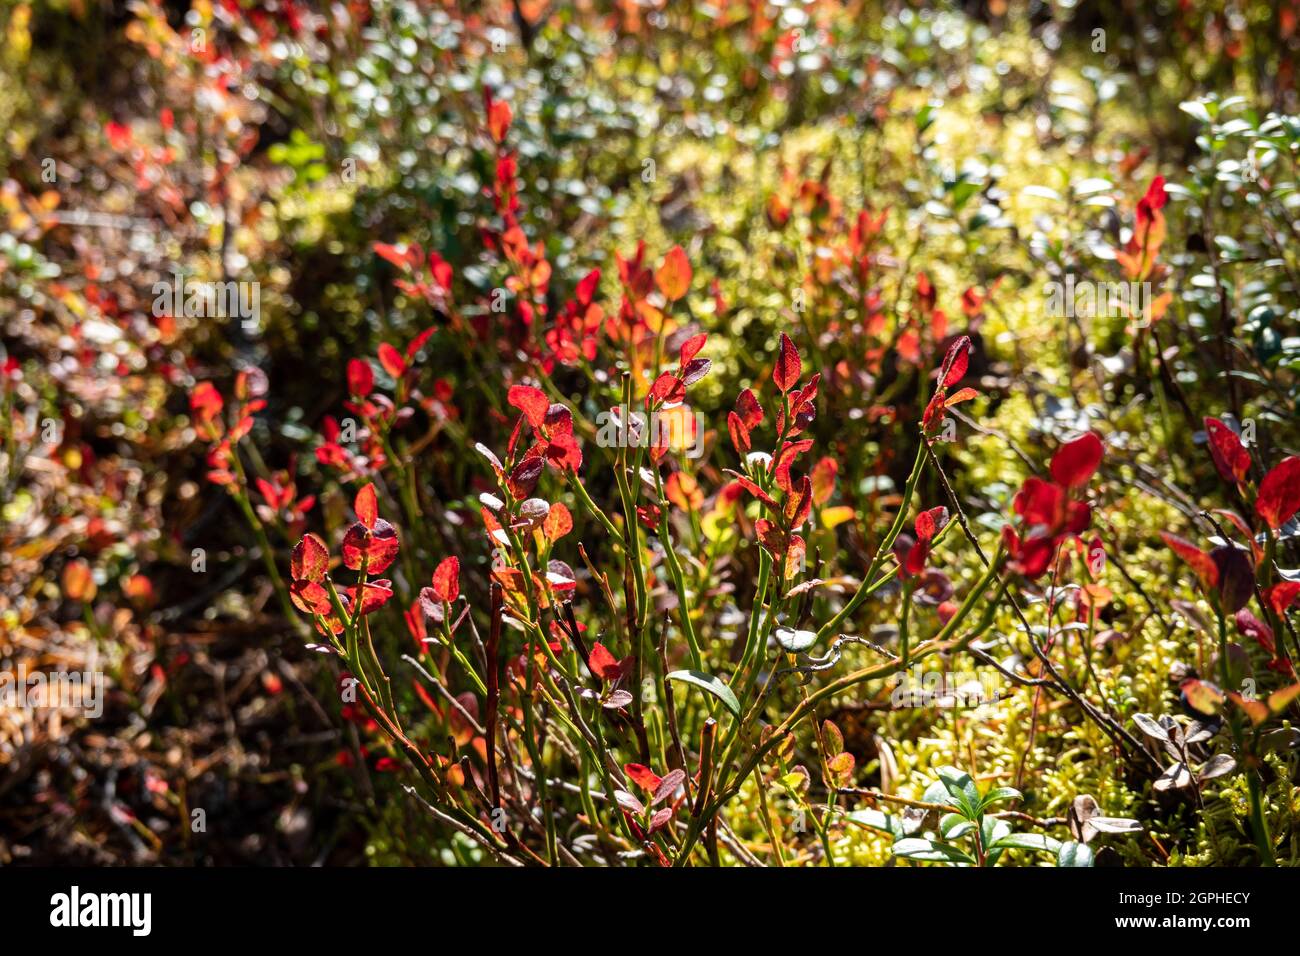 Lingonberry or cowberry leaves in autumn colors Stock Photo